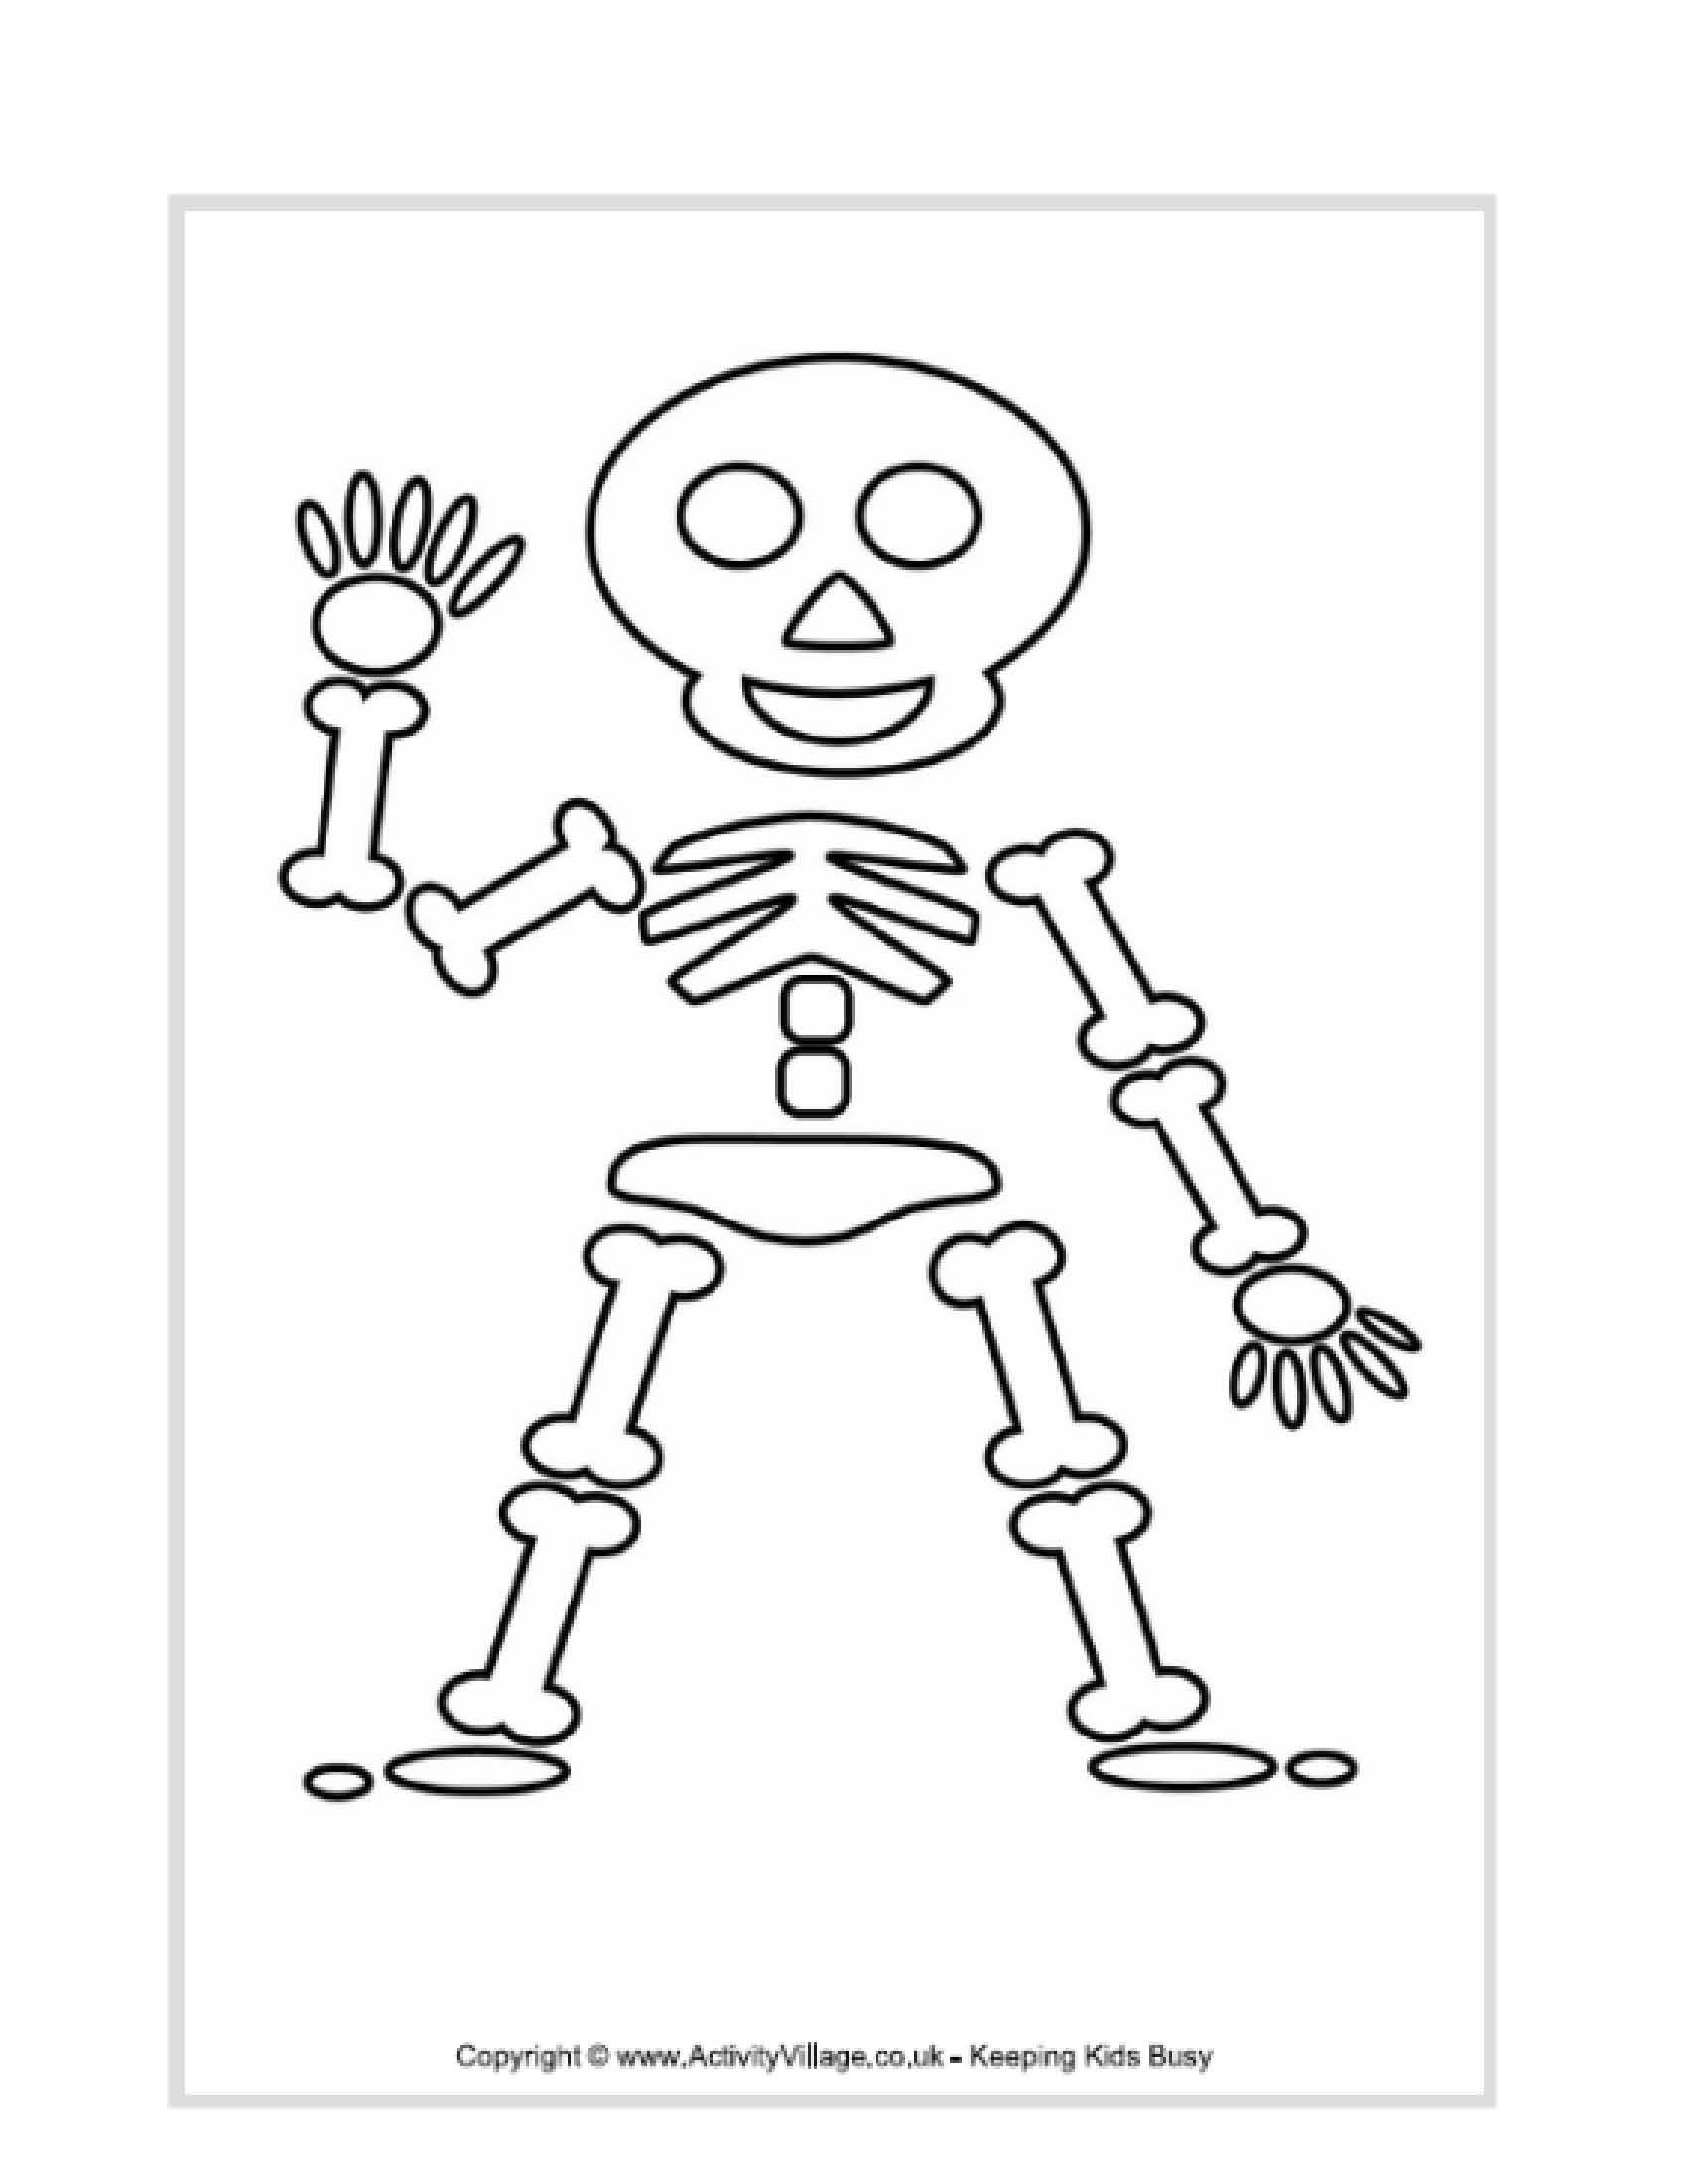 Skeleton Coloring Pages For Preschoolers | Kids Ideas | Halloween - Free Printable Skeleton Coloring Pages